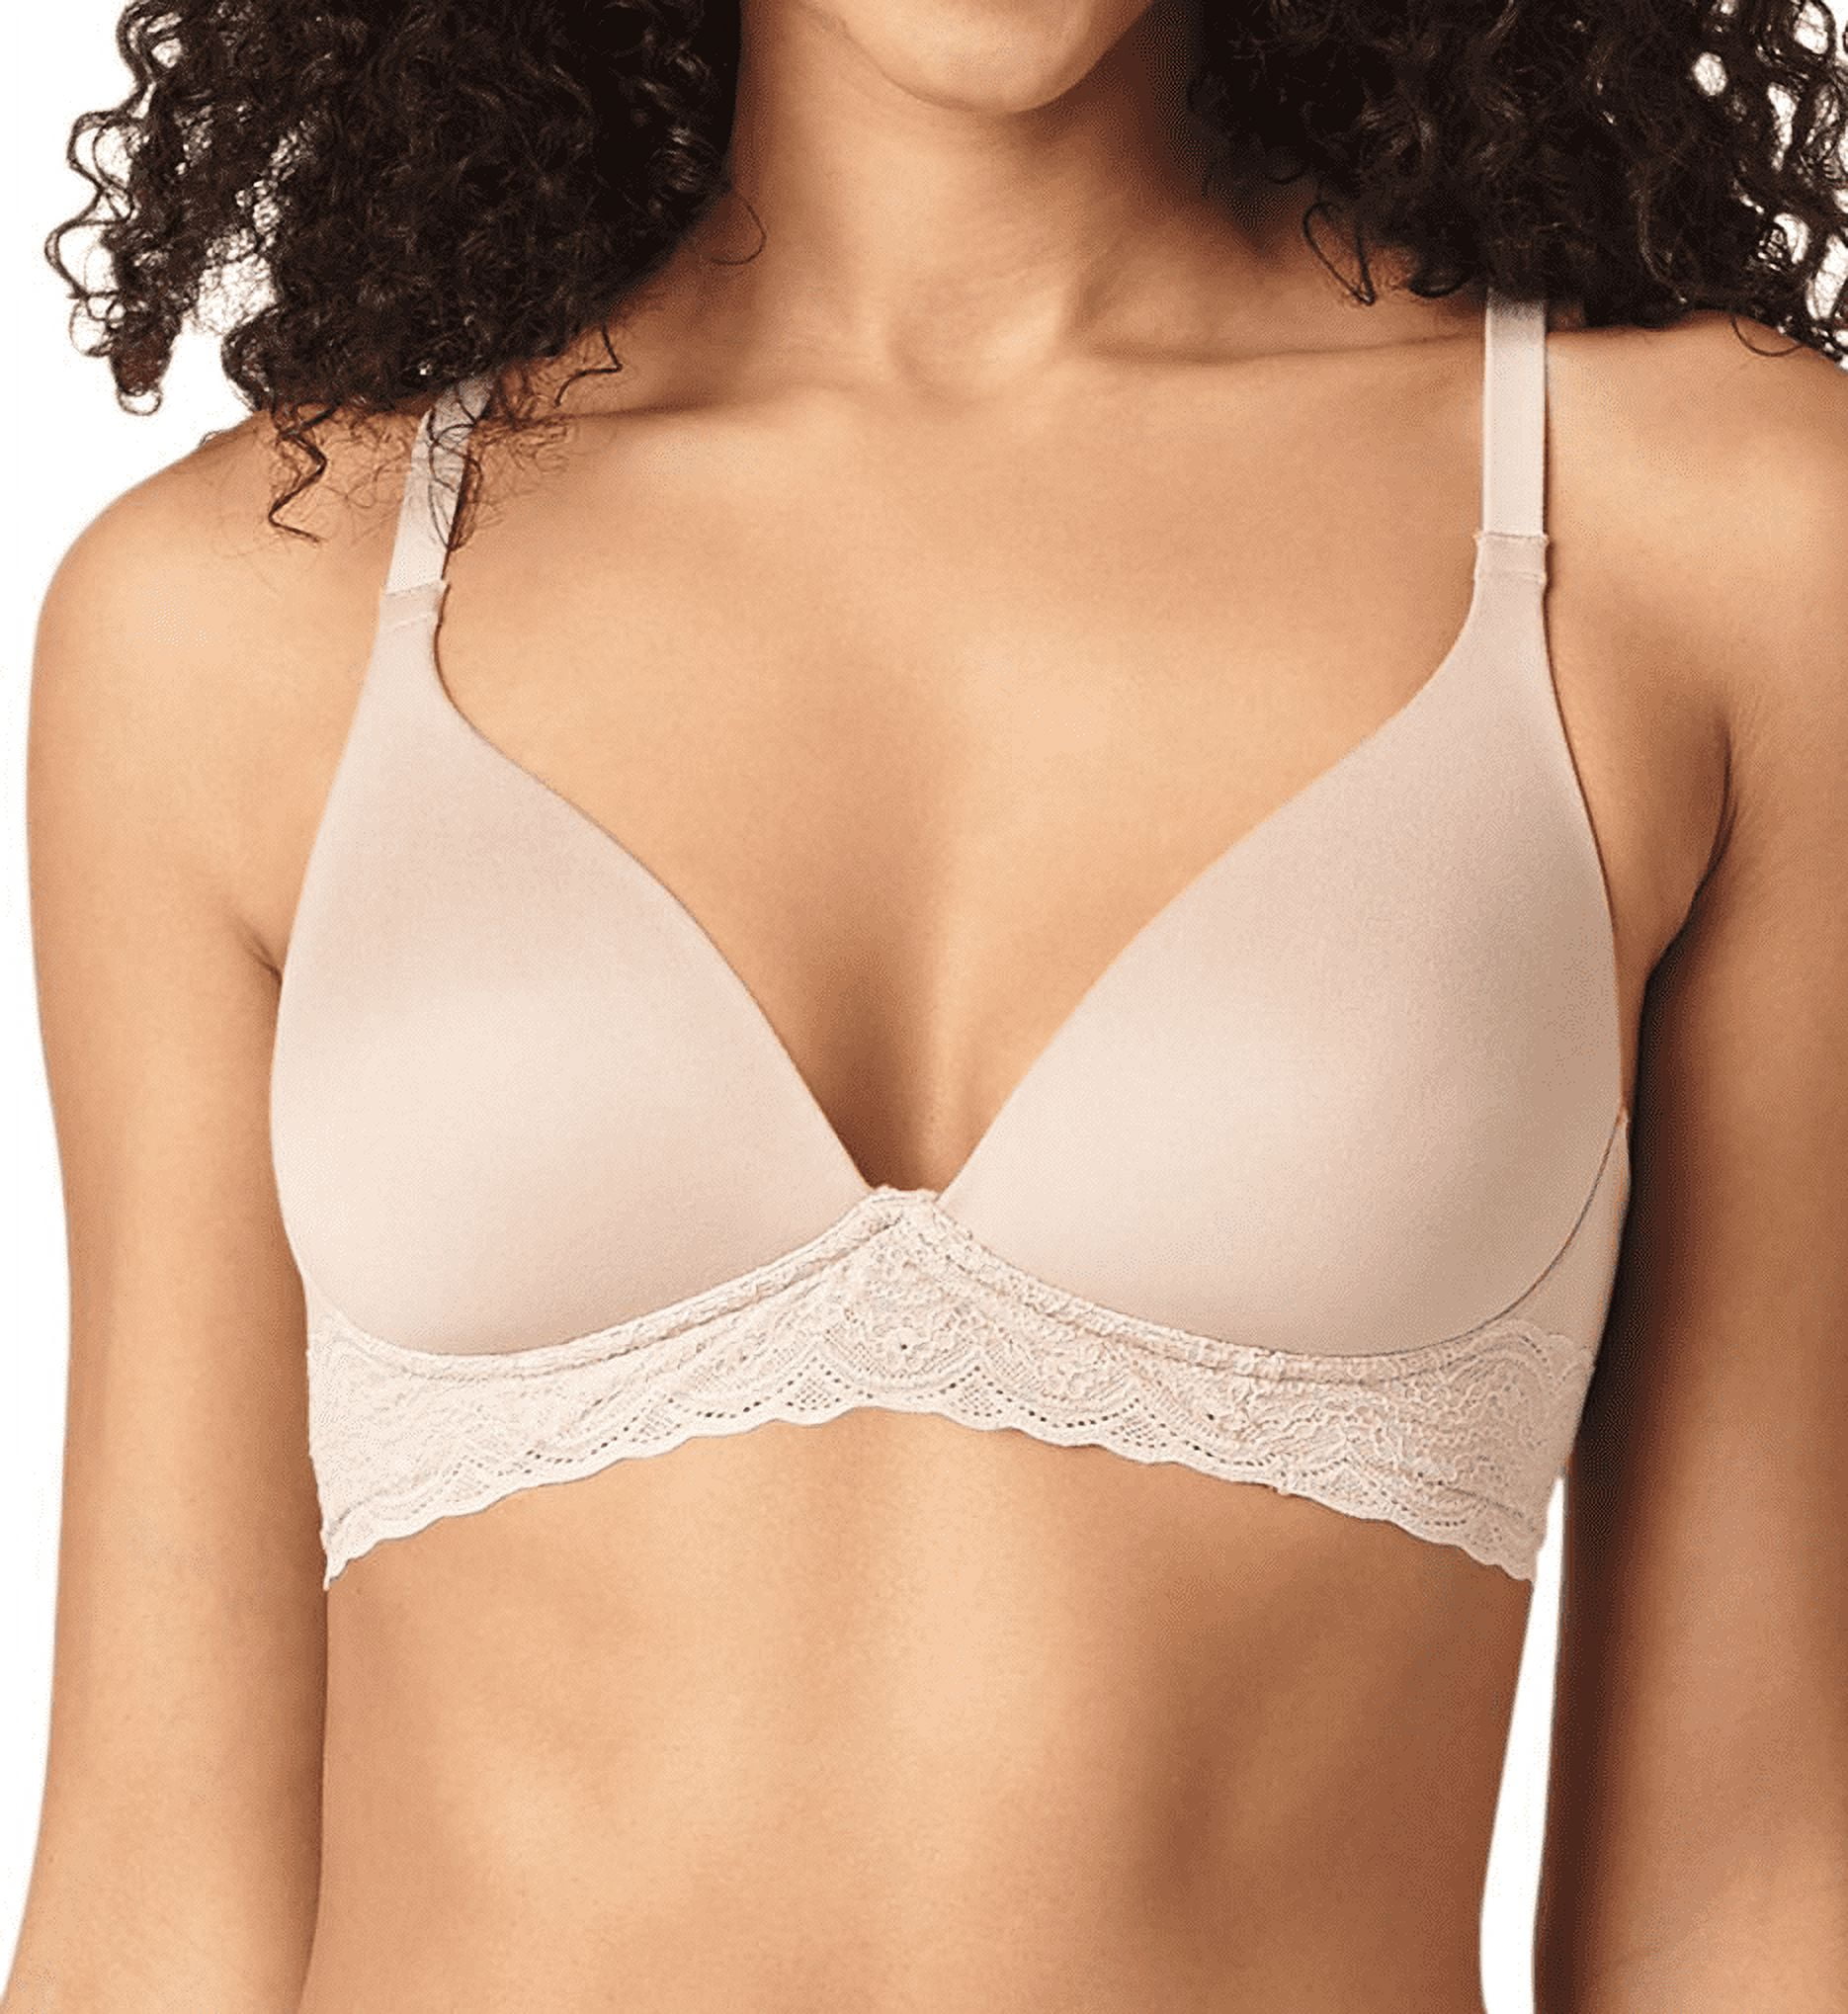 WARNER'S Toasted Almond Cloud 9 Wire Free Triangle Bra, US 36C, UK 36C,  NWOT 